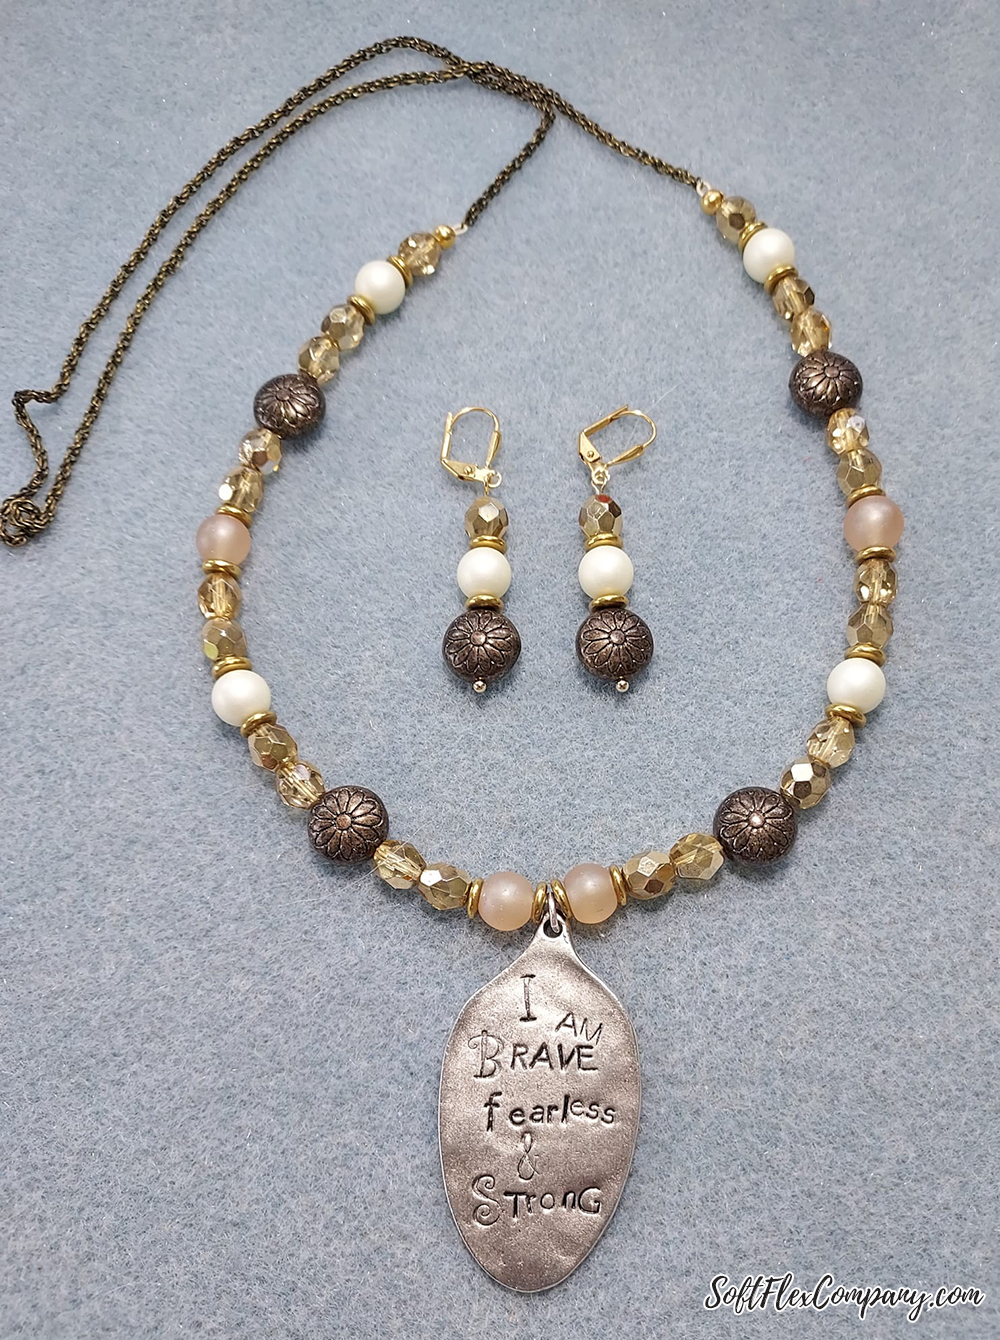 Special Tea Jewelry Design by Carey Marshall Leimbach